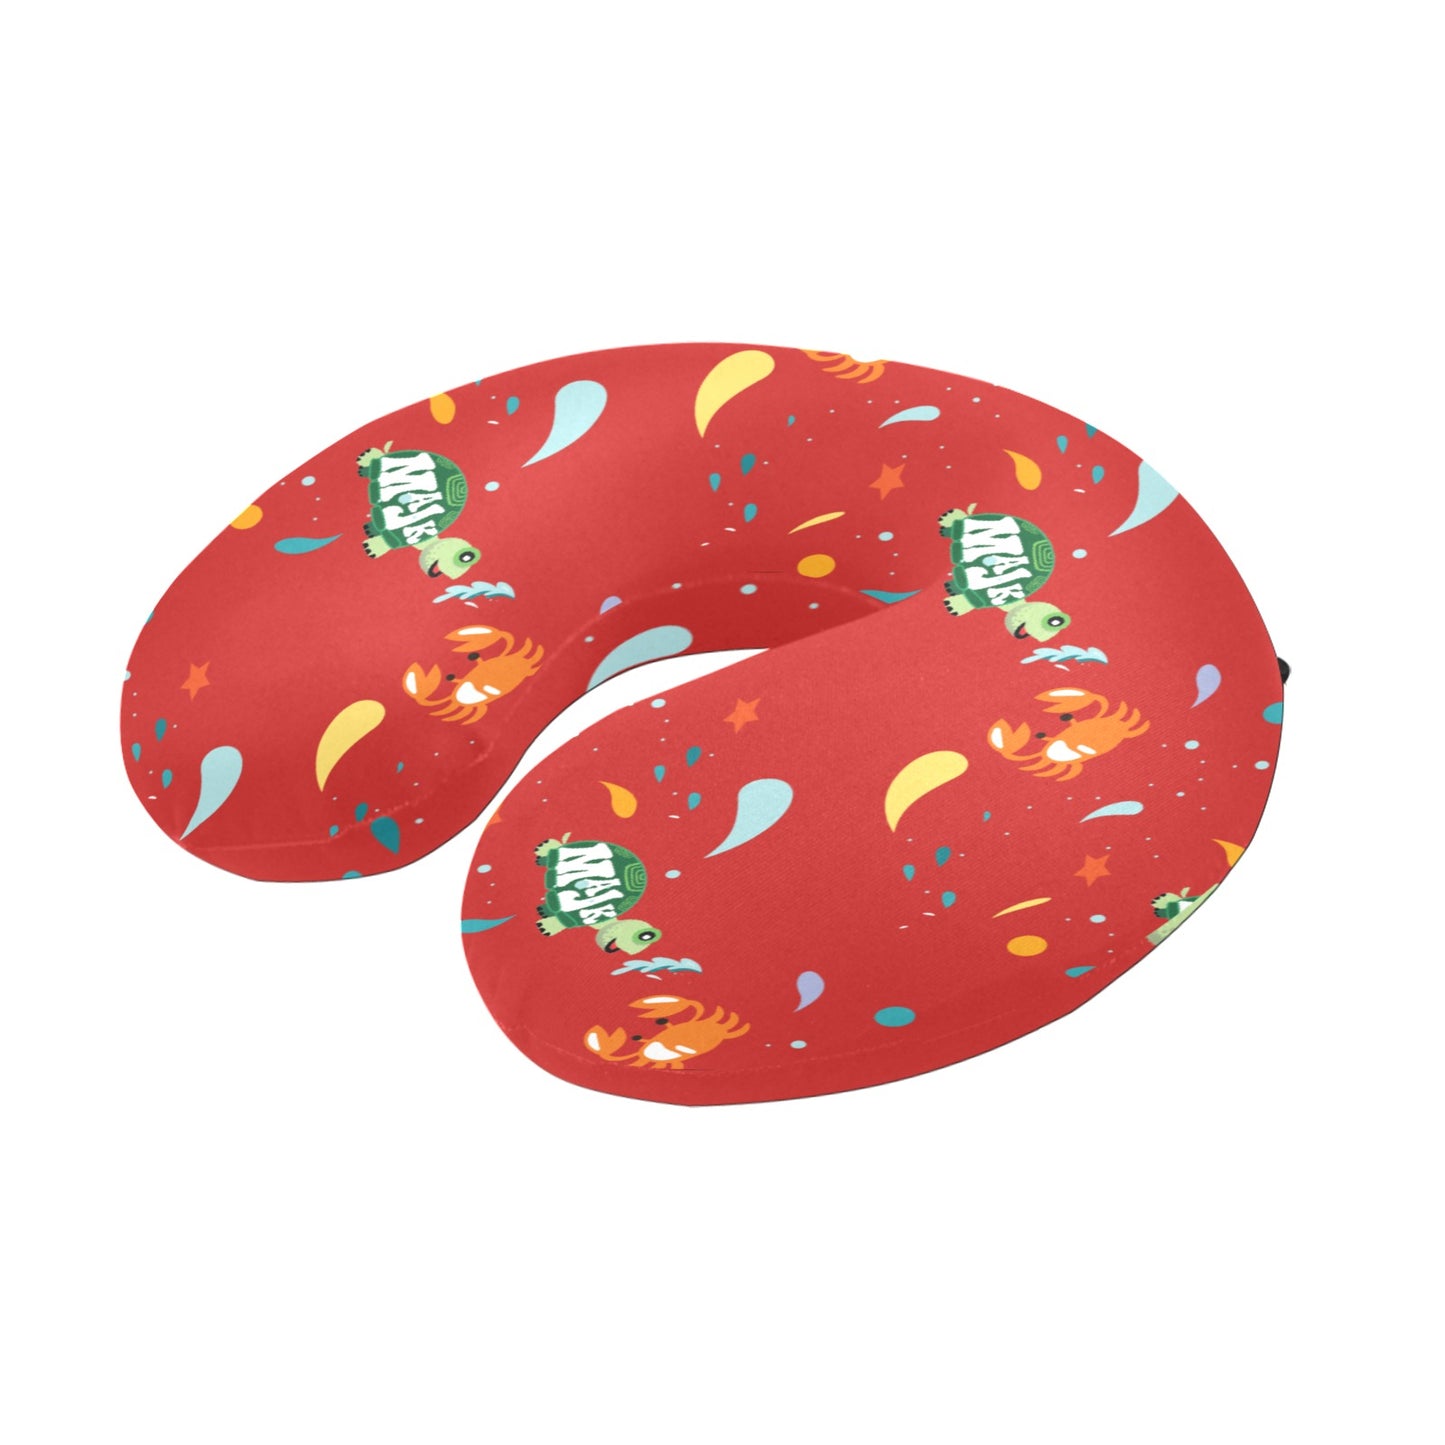 U-Shaped Travel Neck Pillow "Surfs Up" pattern (Red)